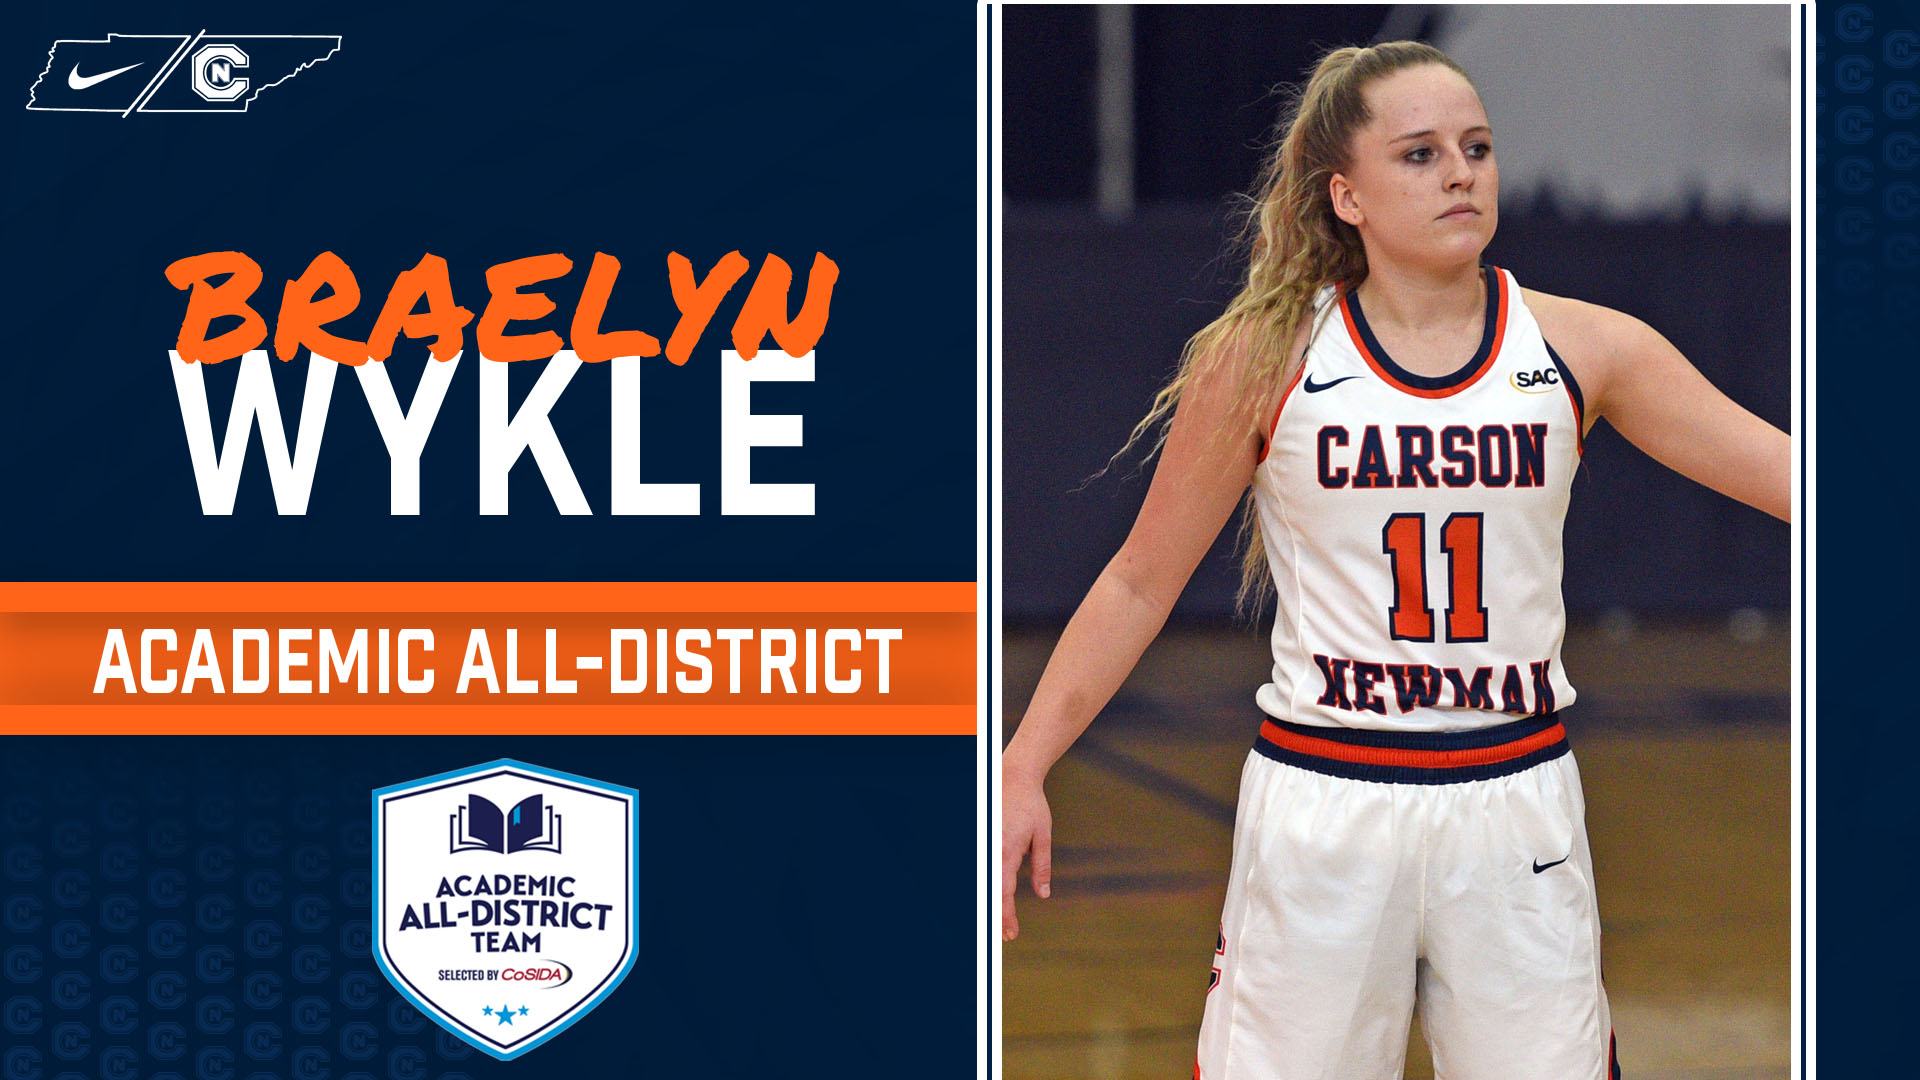 Wykle repeats on CoSIDA Academic All-District team